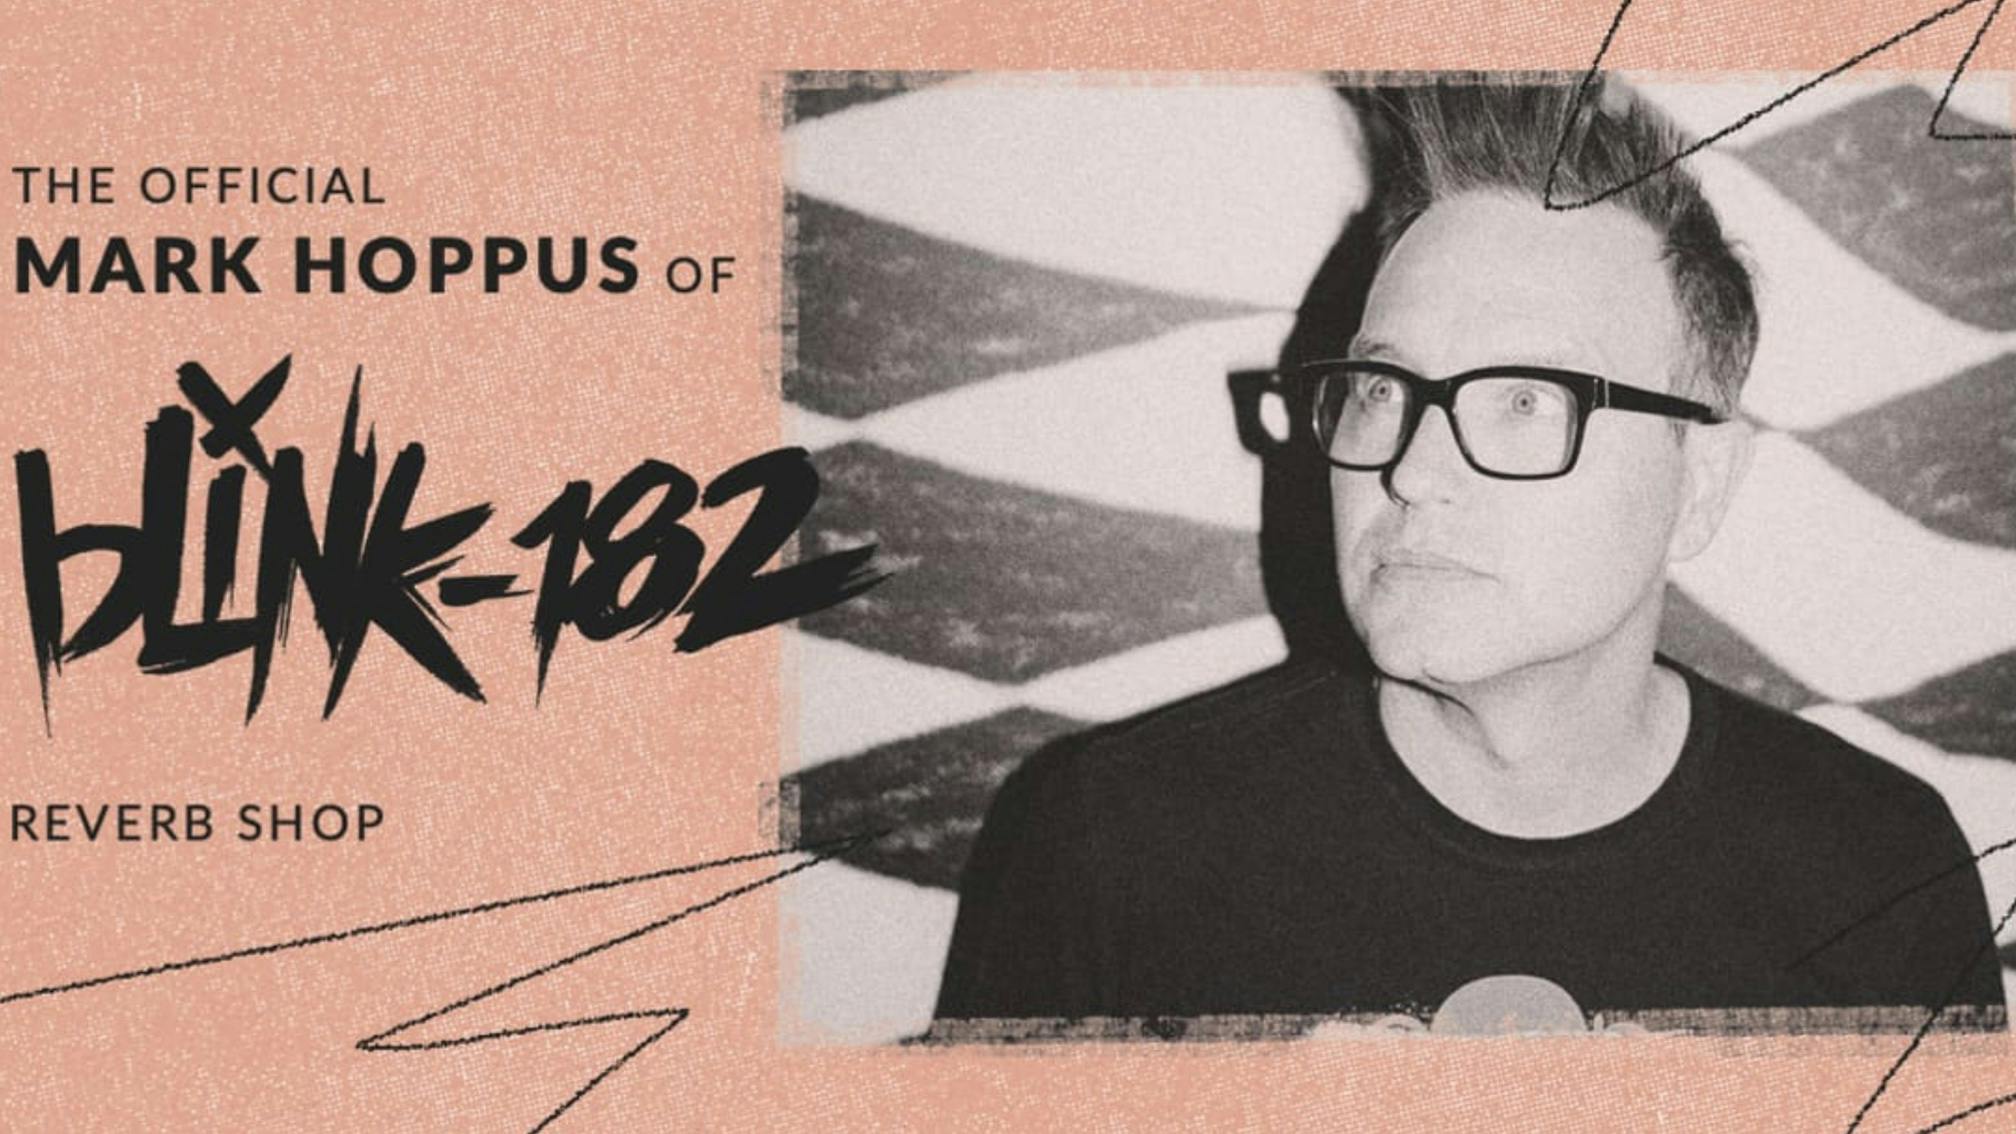 Mark Hoppus to sell used blink-182 and +44 gear